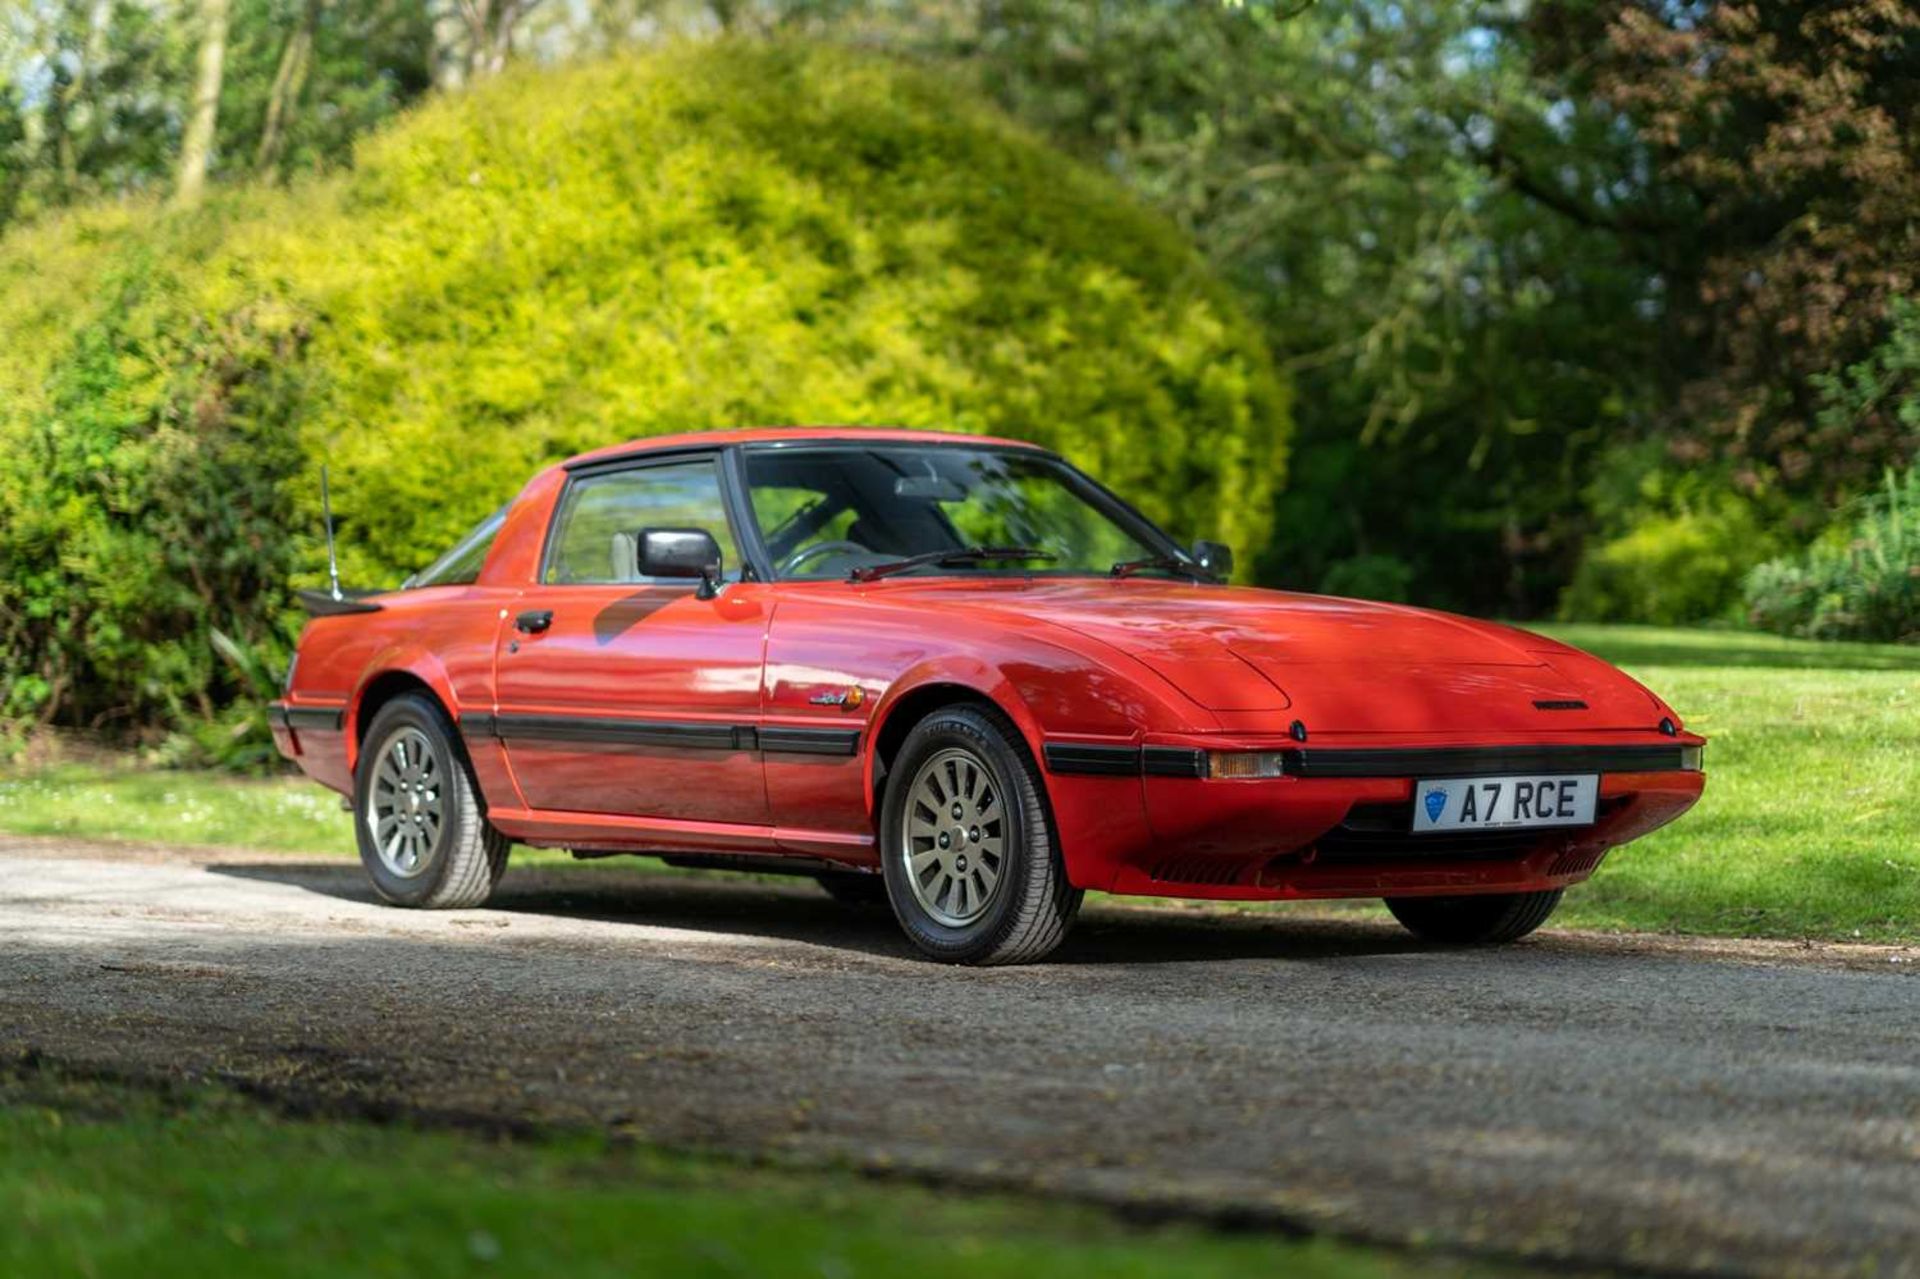 1984 Mazda RX7 Rare first generation model, consigned from long-term ownership recently featured in